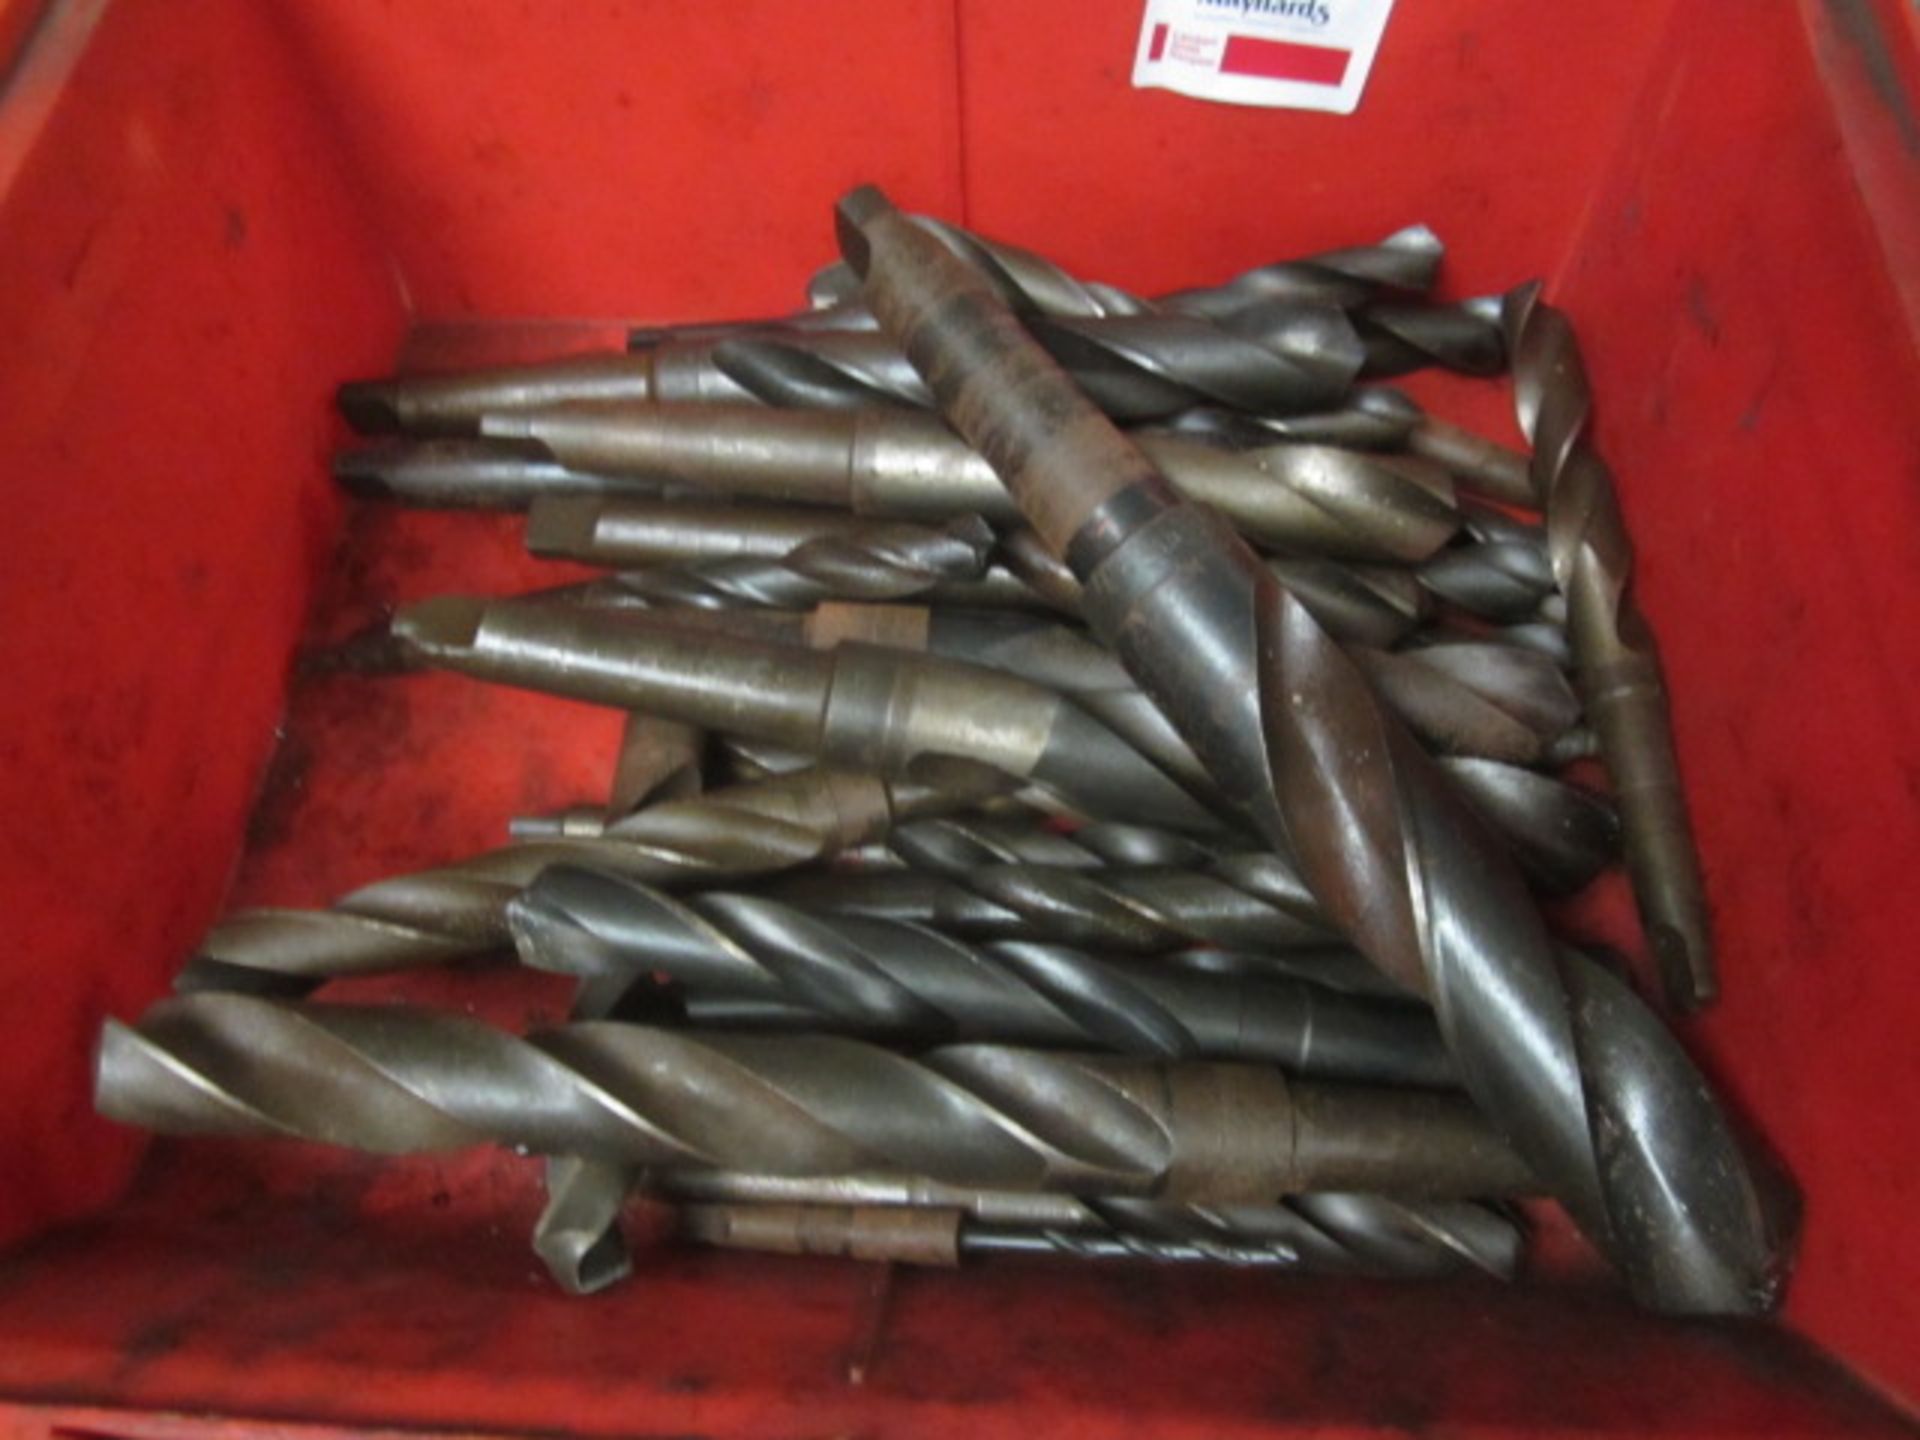 Two boxes of HSS slot drills